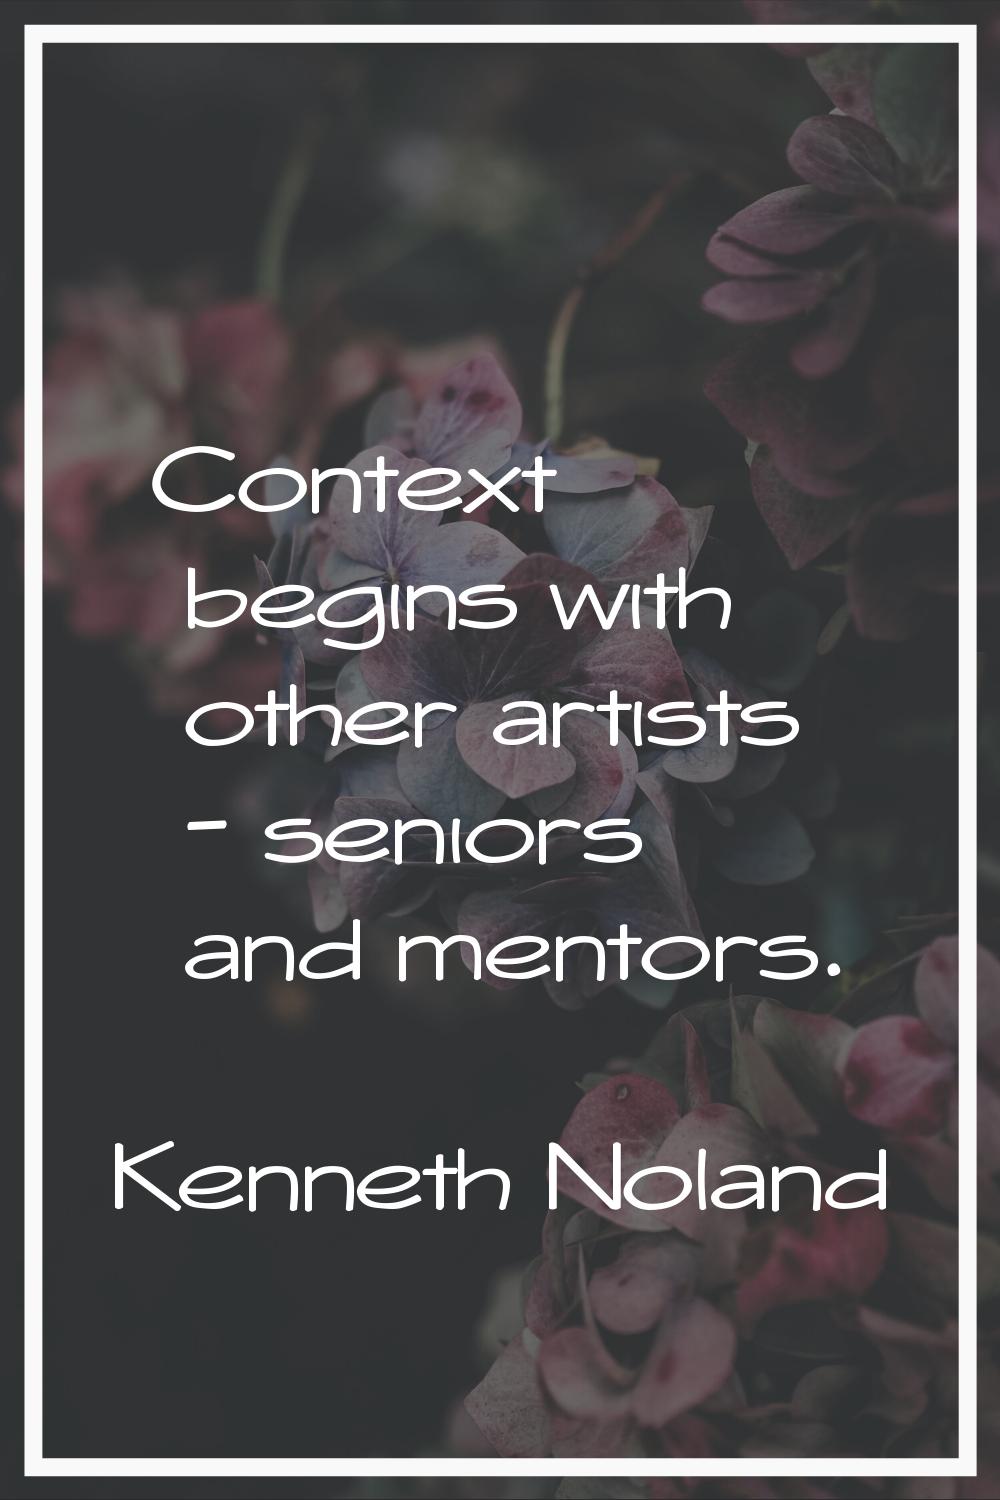 Context begins with other artists - seniors and mentors.